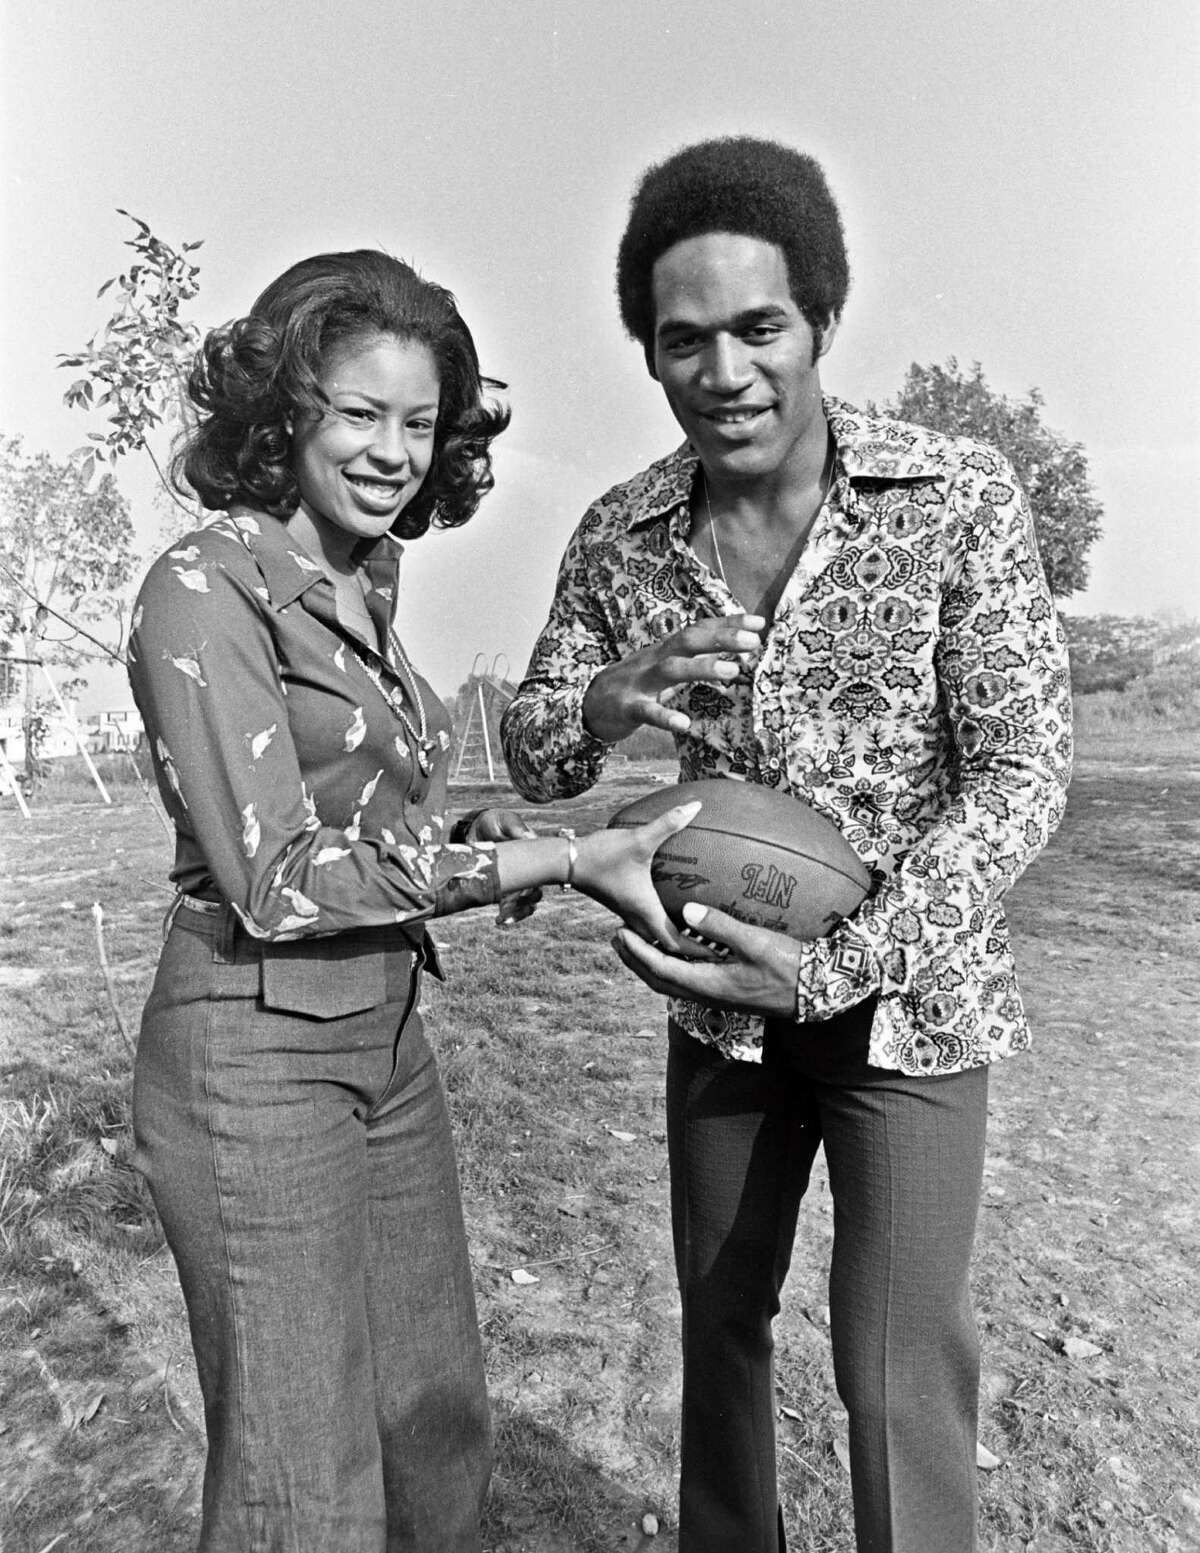 In this 1973 image released by ESPN Film, football player O.J. Simpson appears with his wife Marguerite L. Simpson in their backyard in Amherst, N.Y. A documentary about Simpson, "O.J.: Made in America," premieres its opening two-hour segment on ABC on Saturday at 9 p.m. EDT, then moves next week to ESPN, where all five editions will air on June 14, 15, 17 and 18.(Mickey Osterreicher/ESPN Films via AP)